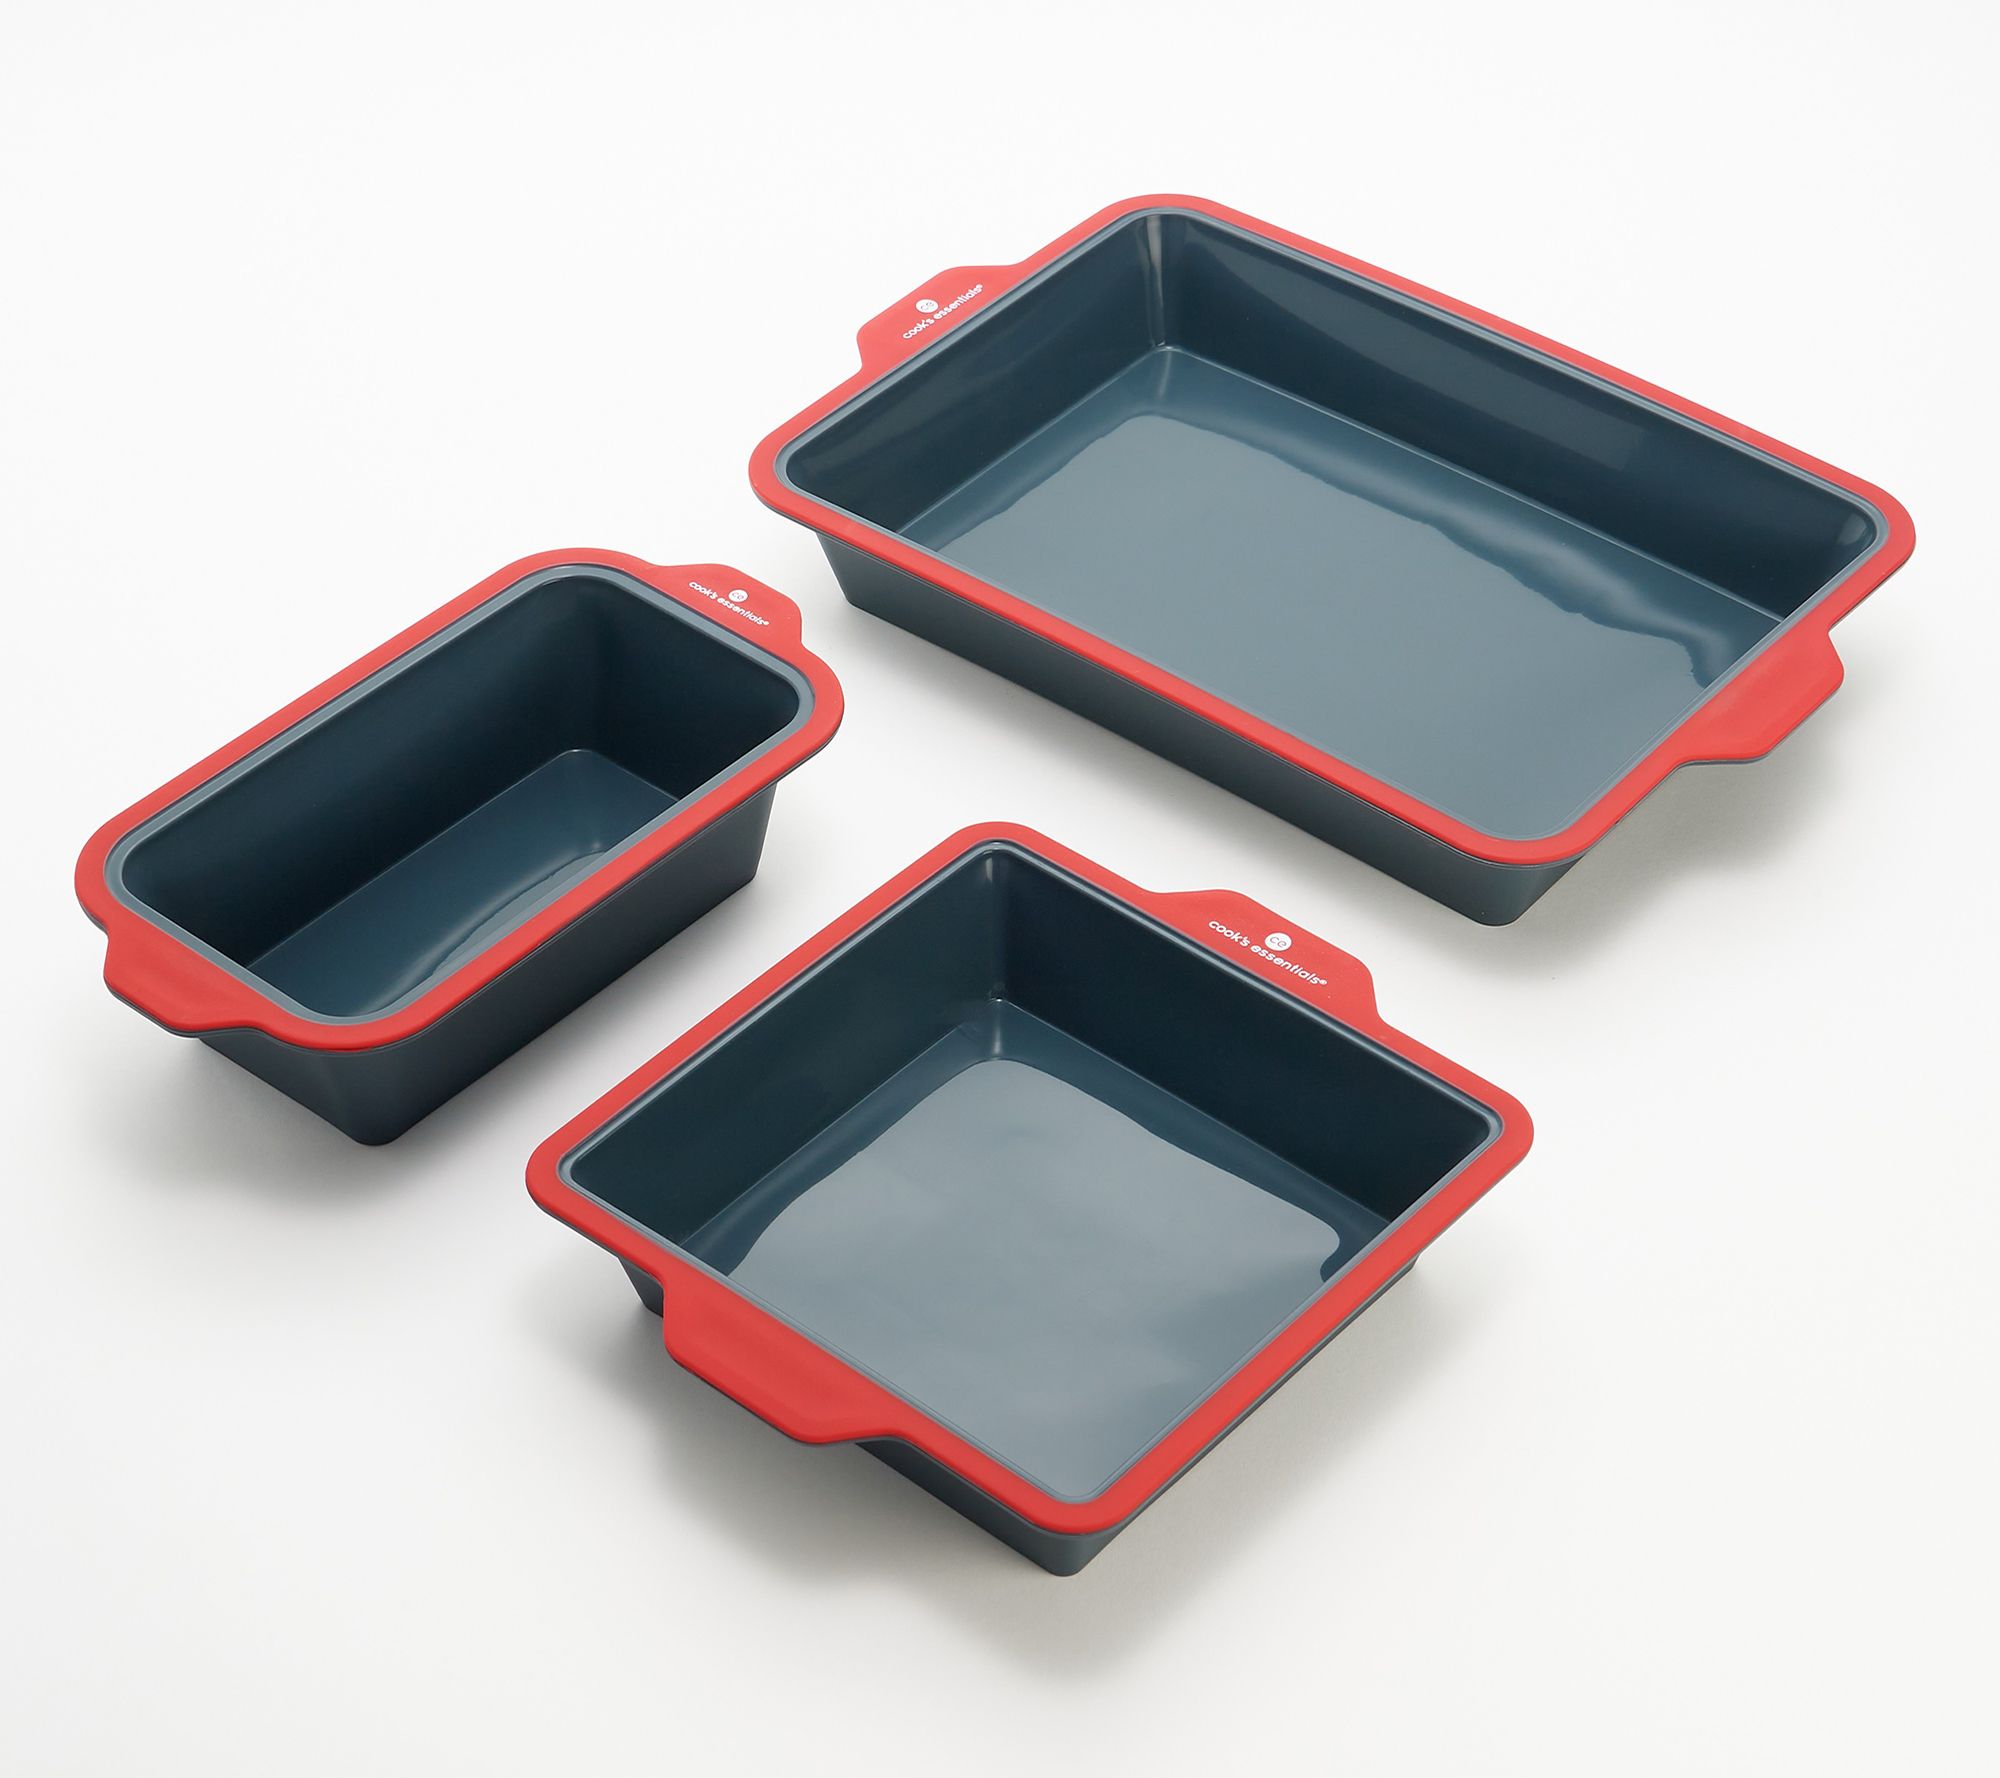 As Is Cook's Essentials 3-Piece Silicone Bakeware Set 